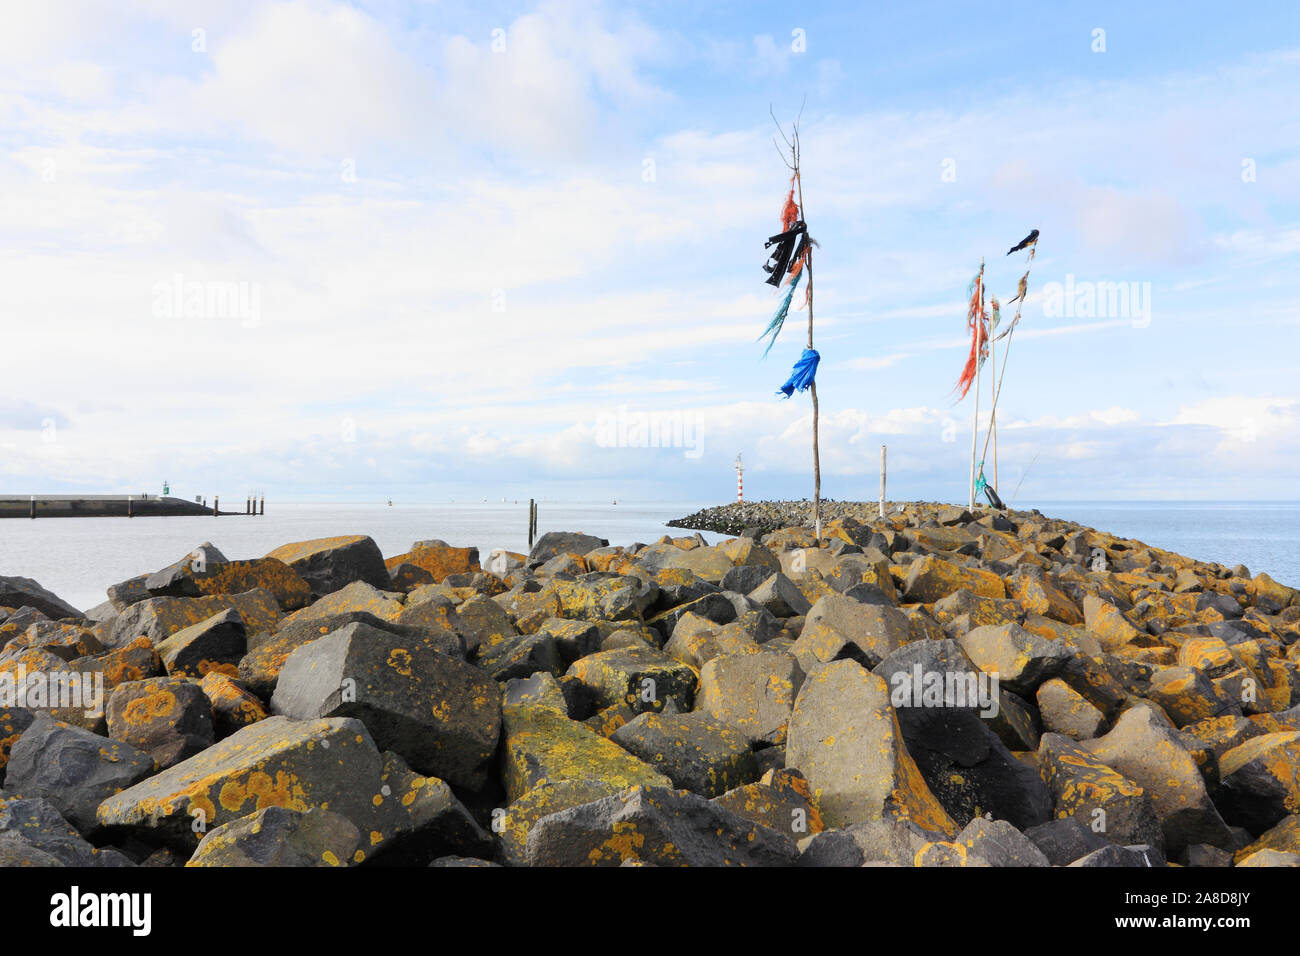 Poles with colored rope and plastic waving in the wind on breakwater or pier in the Wadden Sea at the entrance to the port of Harlingen The Netherland Stock Photo